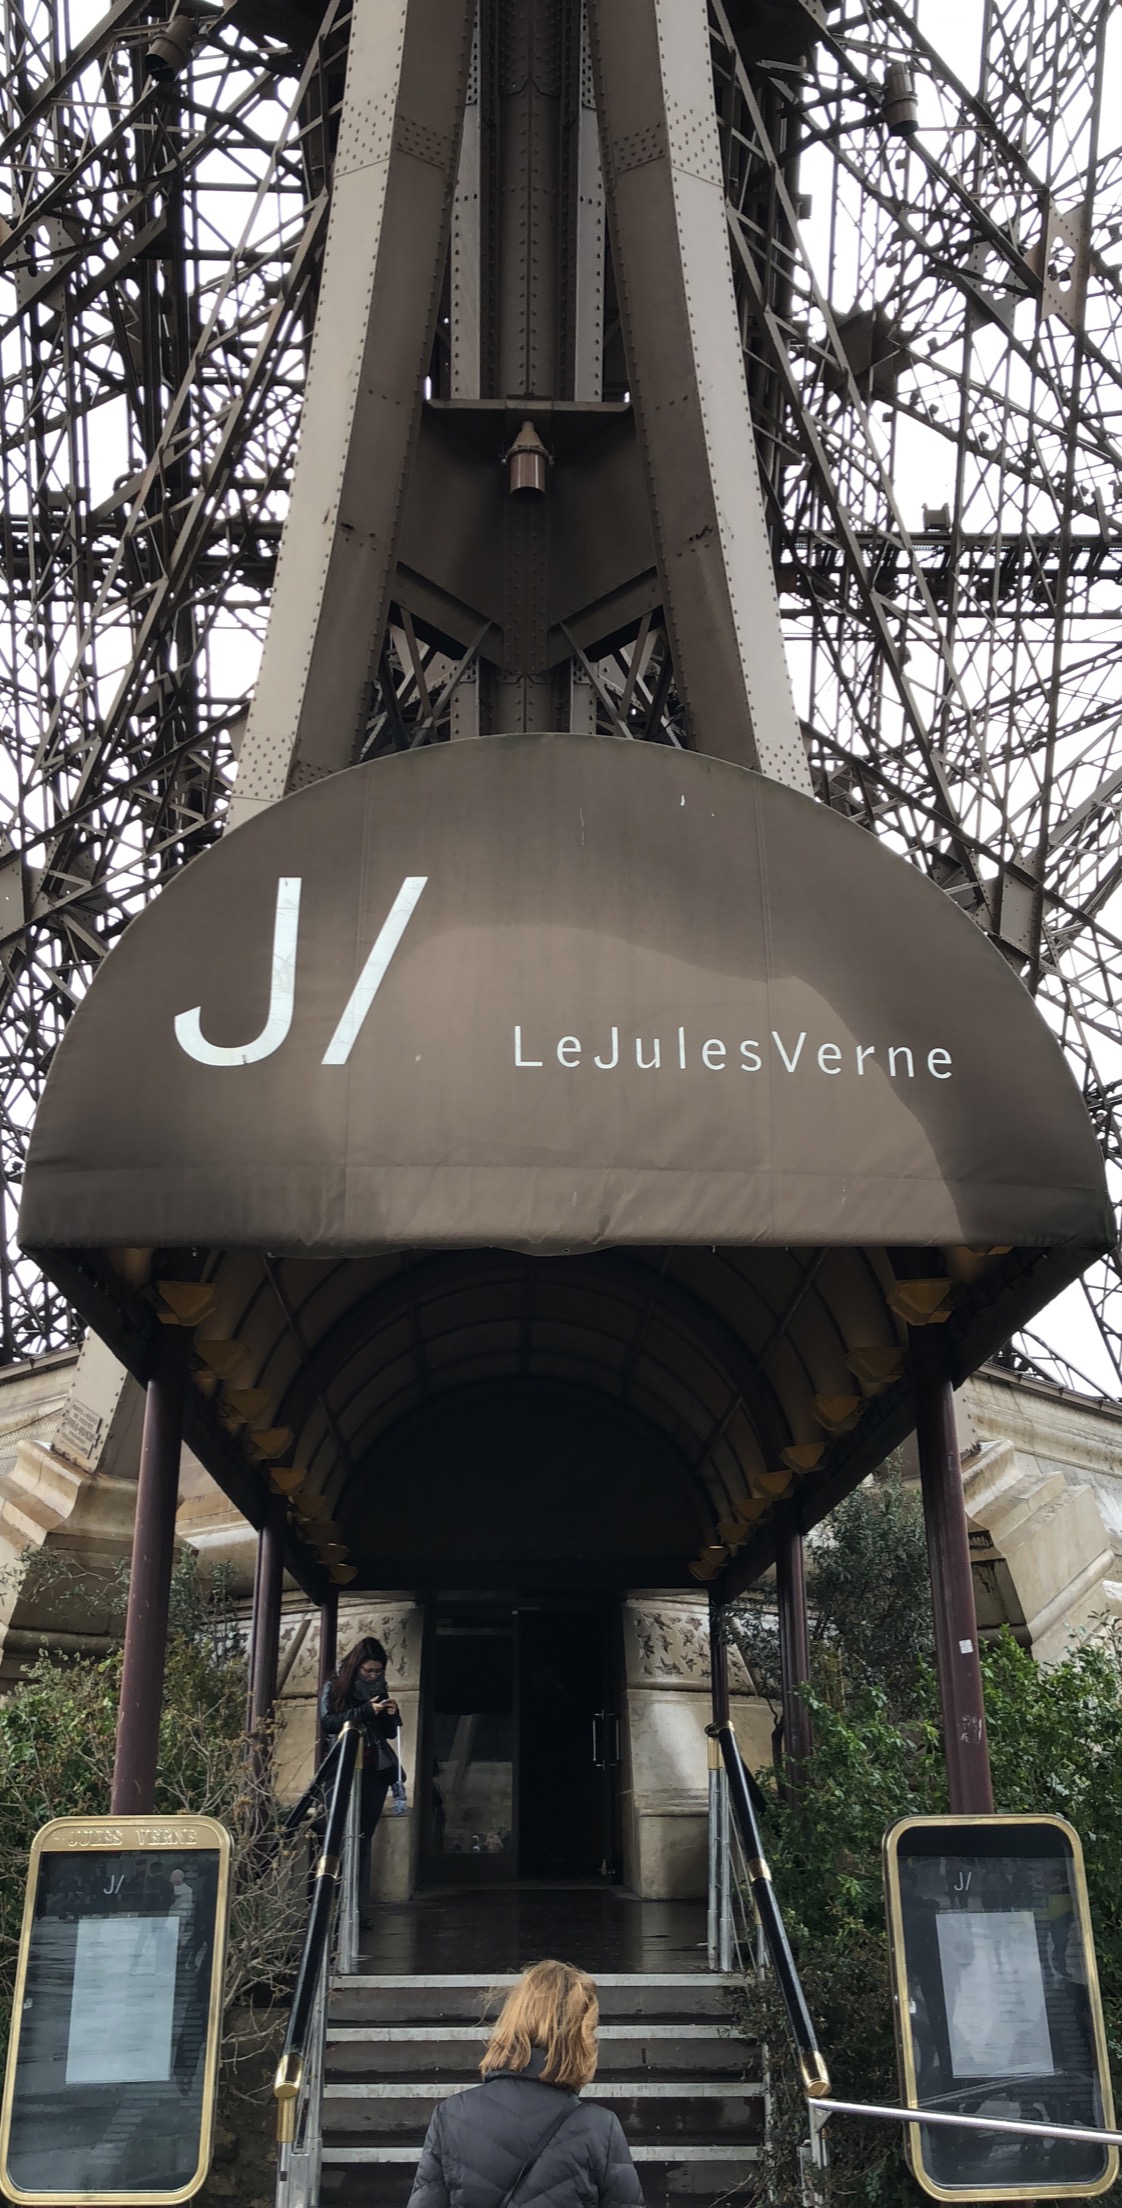 Le Jules Verne at the Eiffel Tower